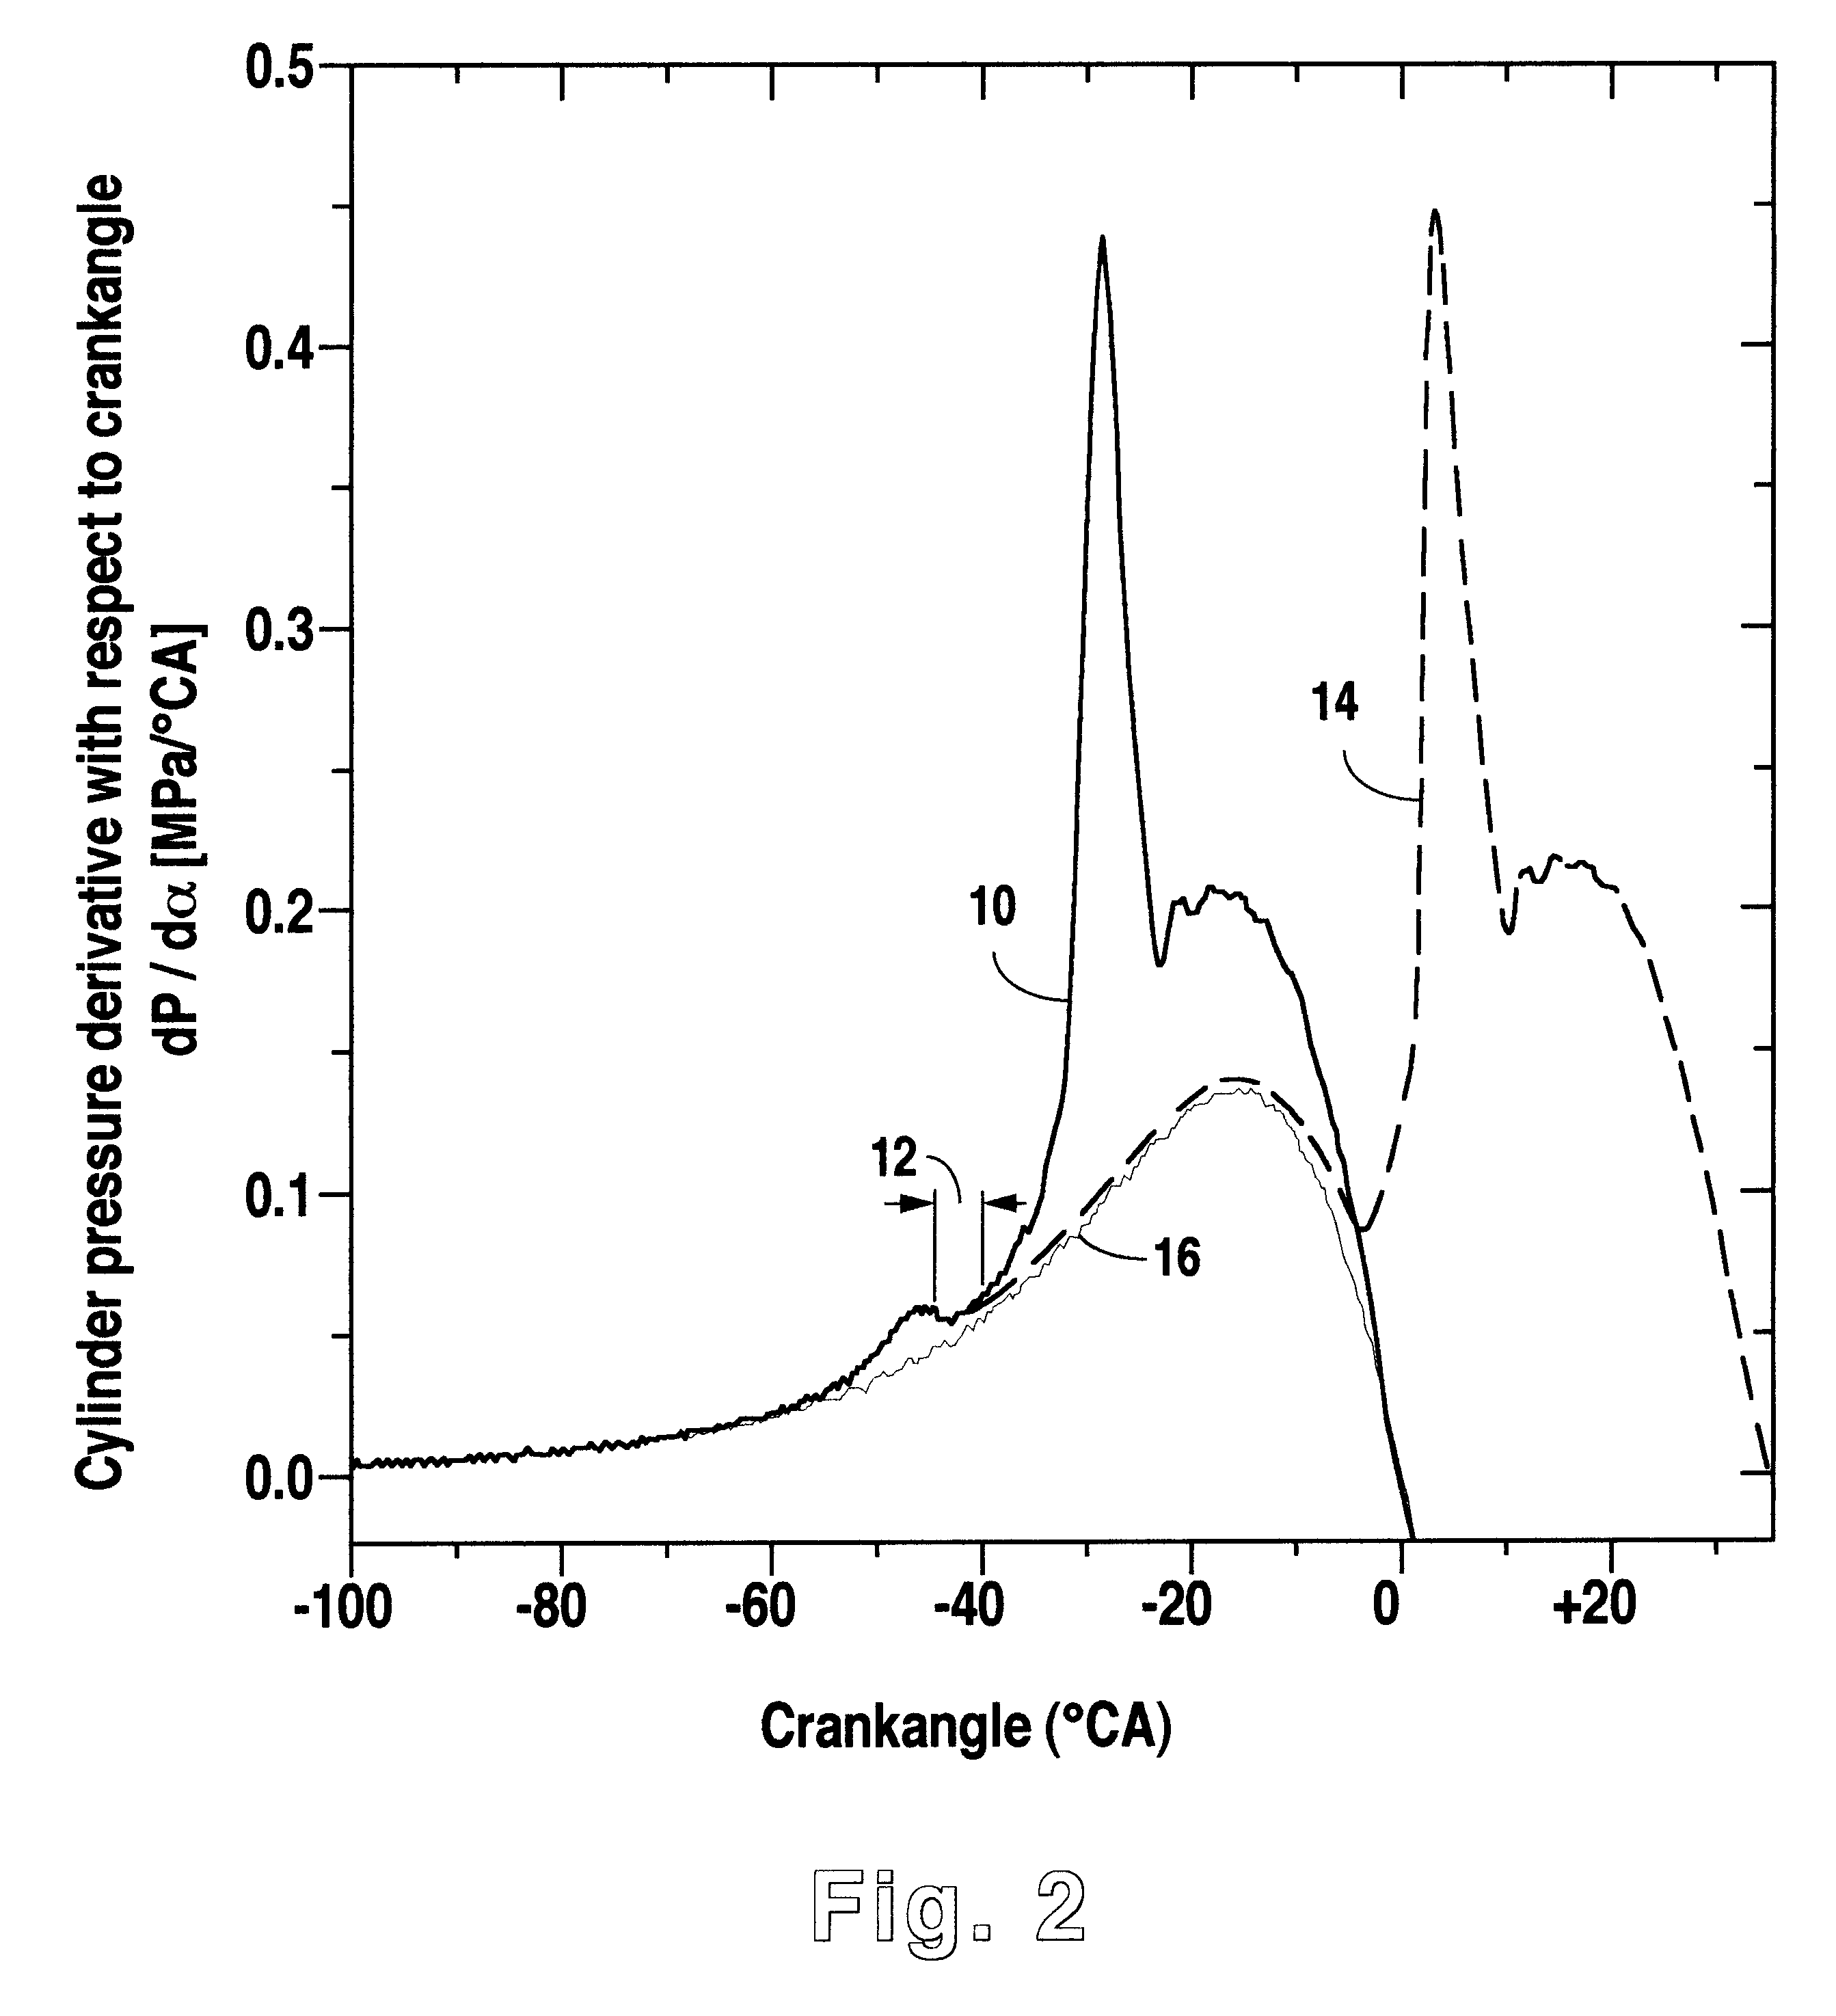 Engine and method for controlling homogenous charge compression ignition combustion in a diesel engine